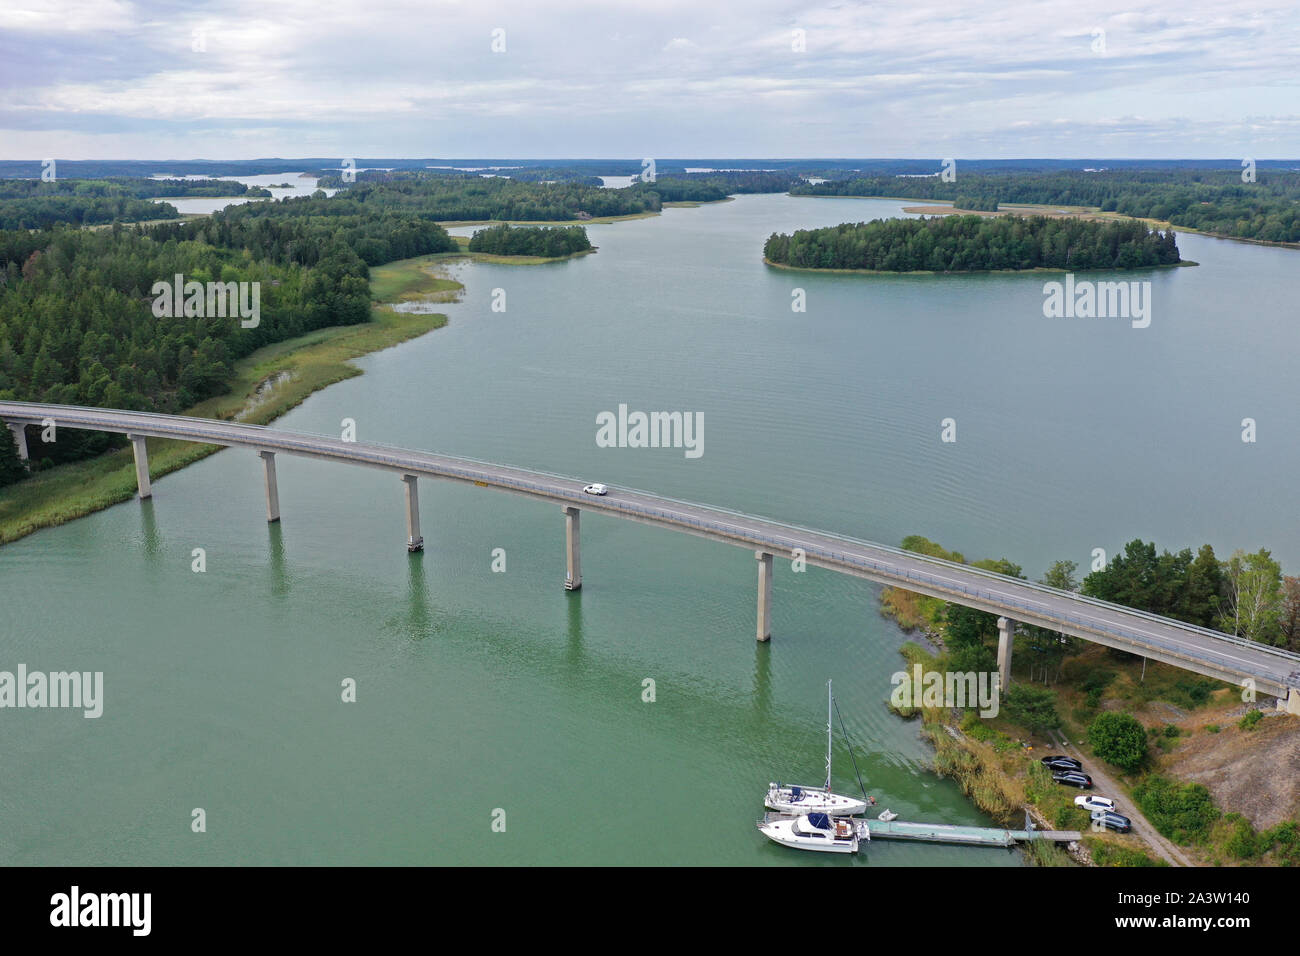 Page 3 - Drönarbild High Resolution Stock Photography and Images - Alamy